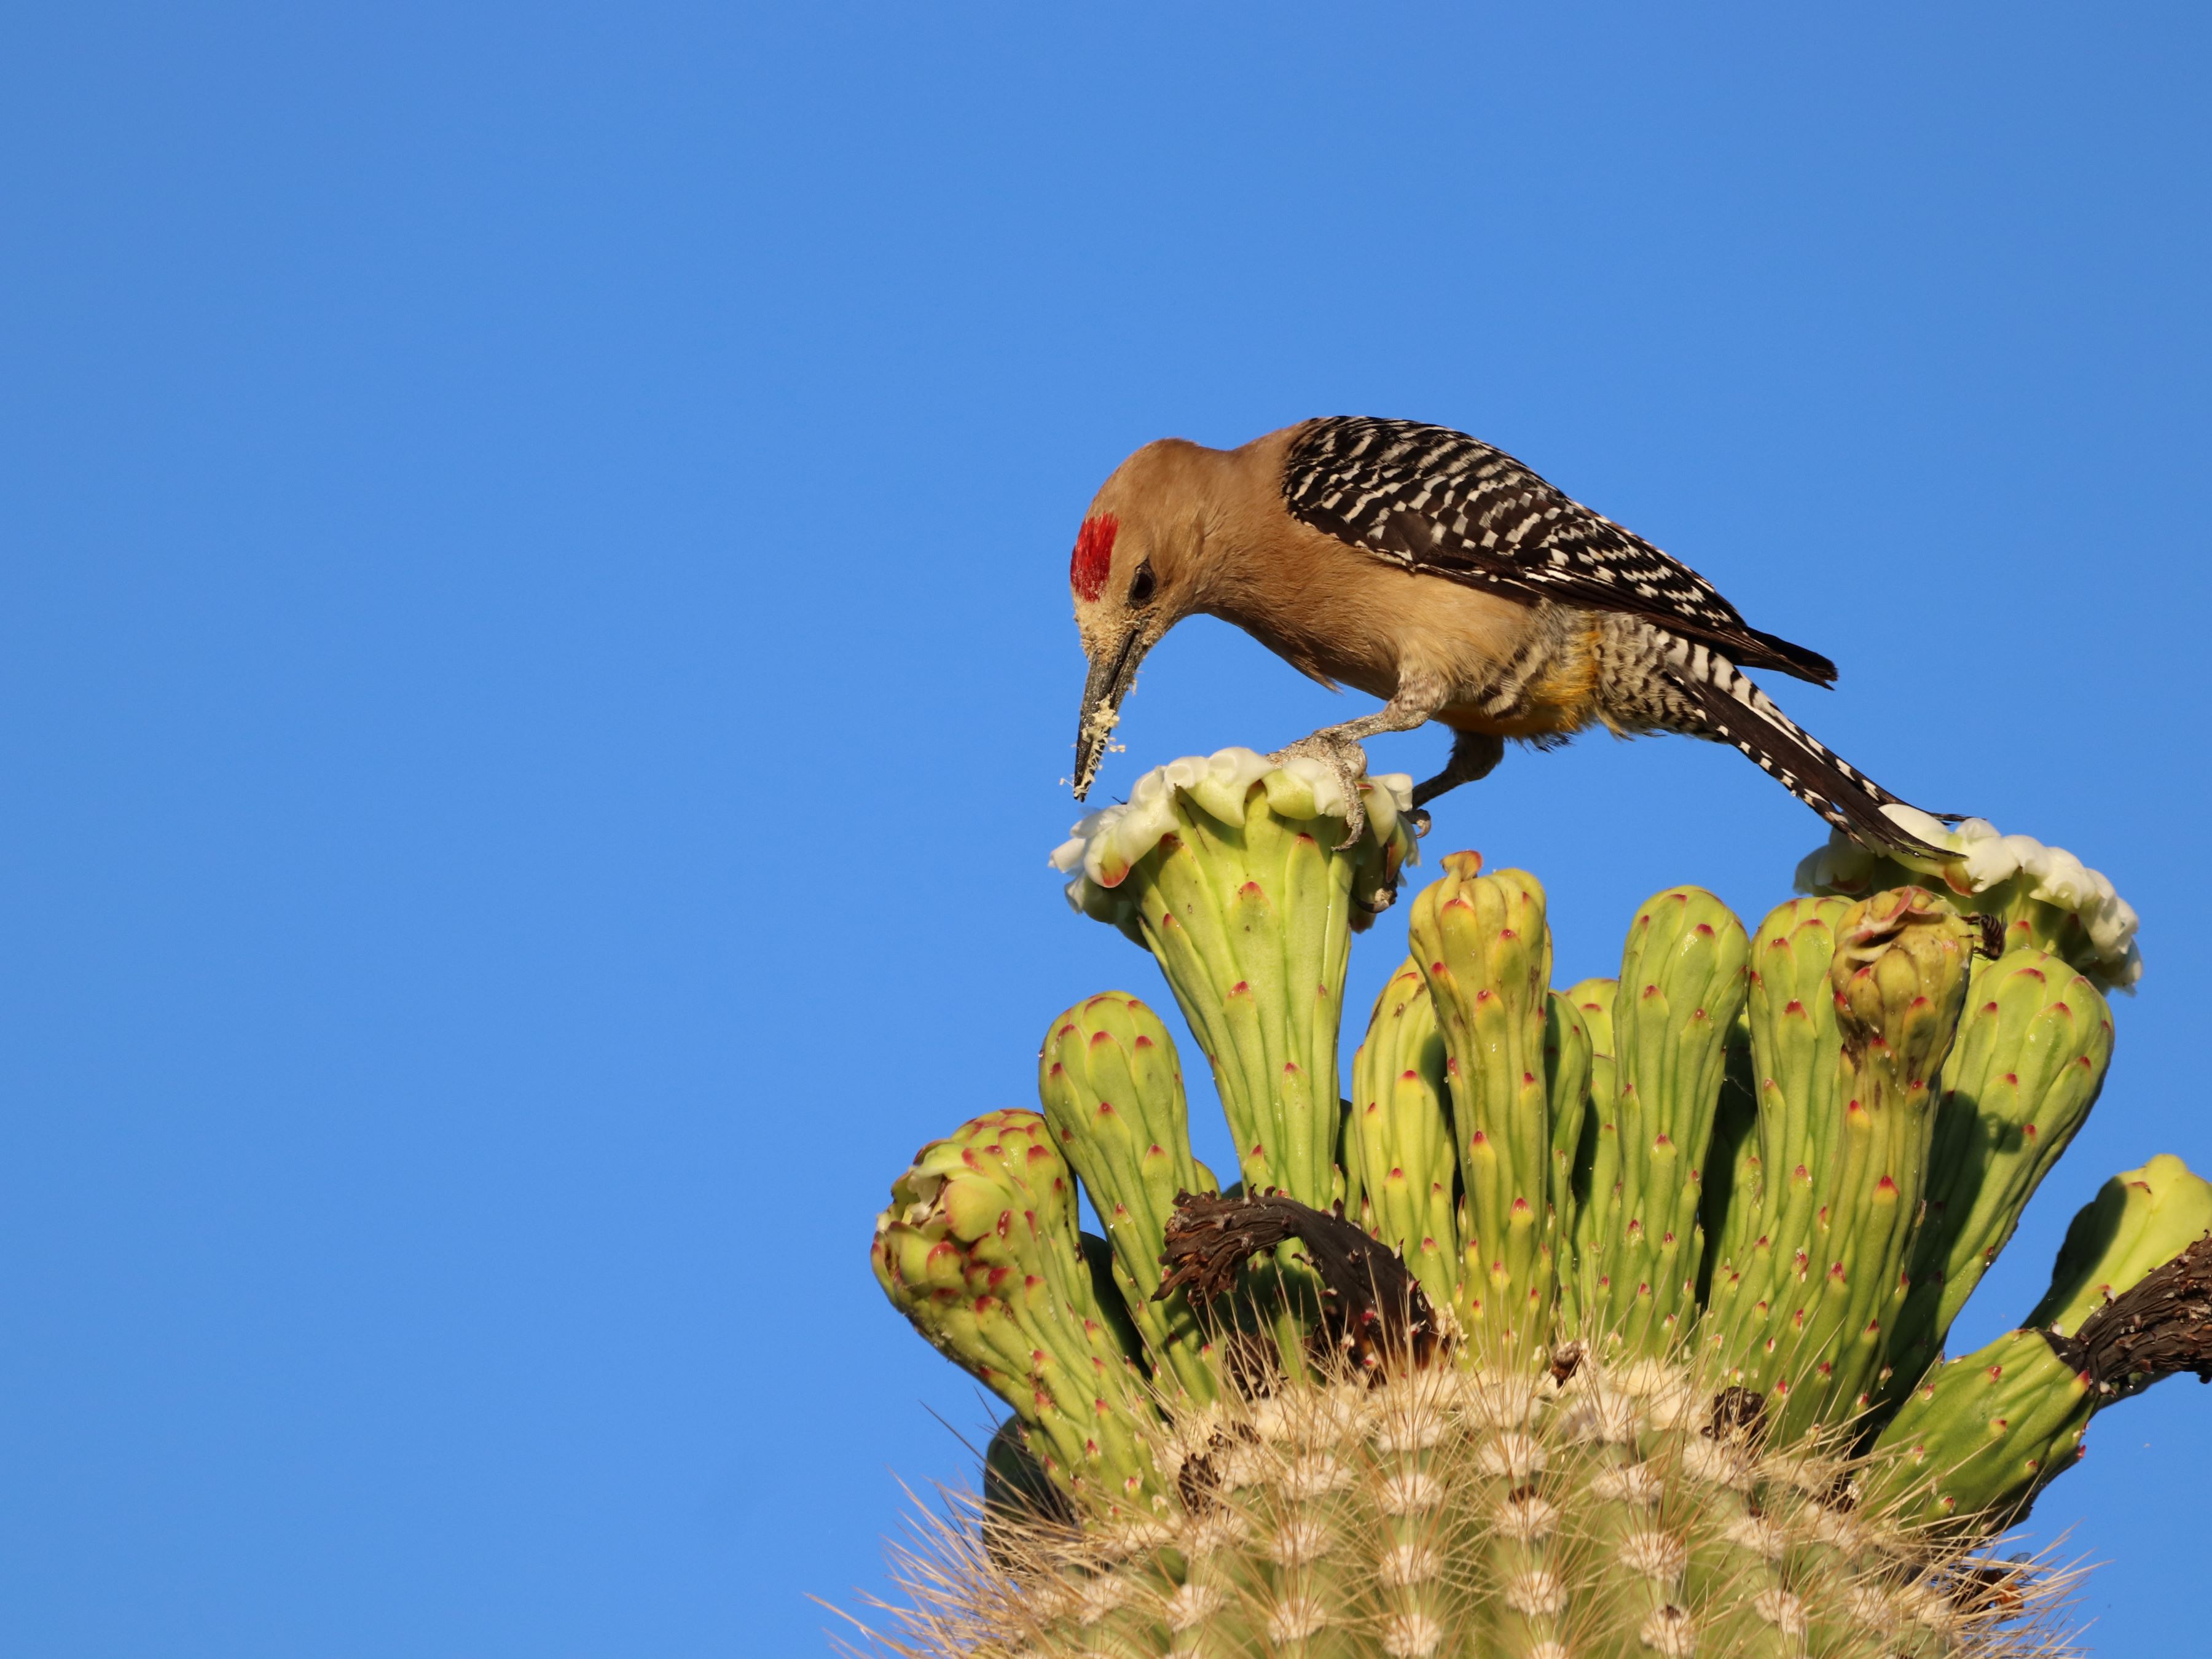 Photo by Sally Mesarosh  |  This Gila Woodpecker was enjoying the fruit of the saguaro cactus in the spring.